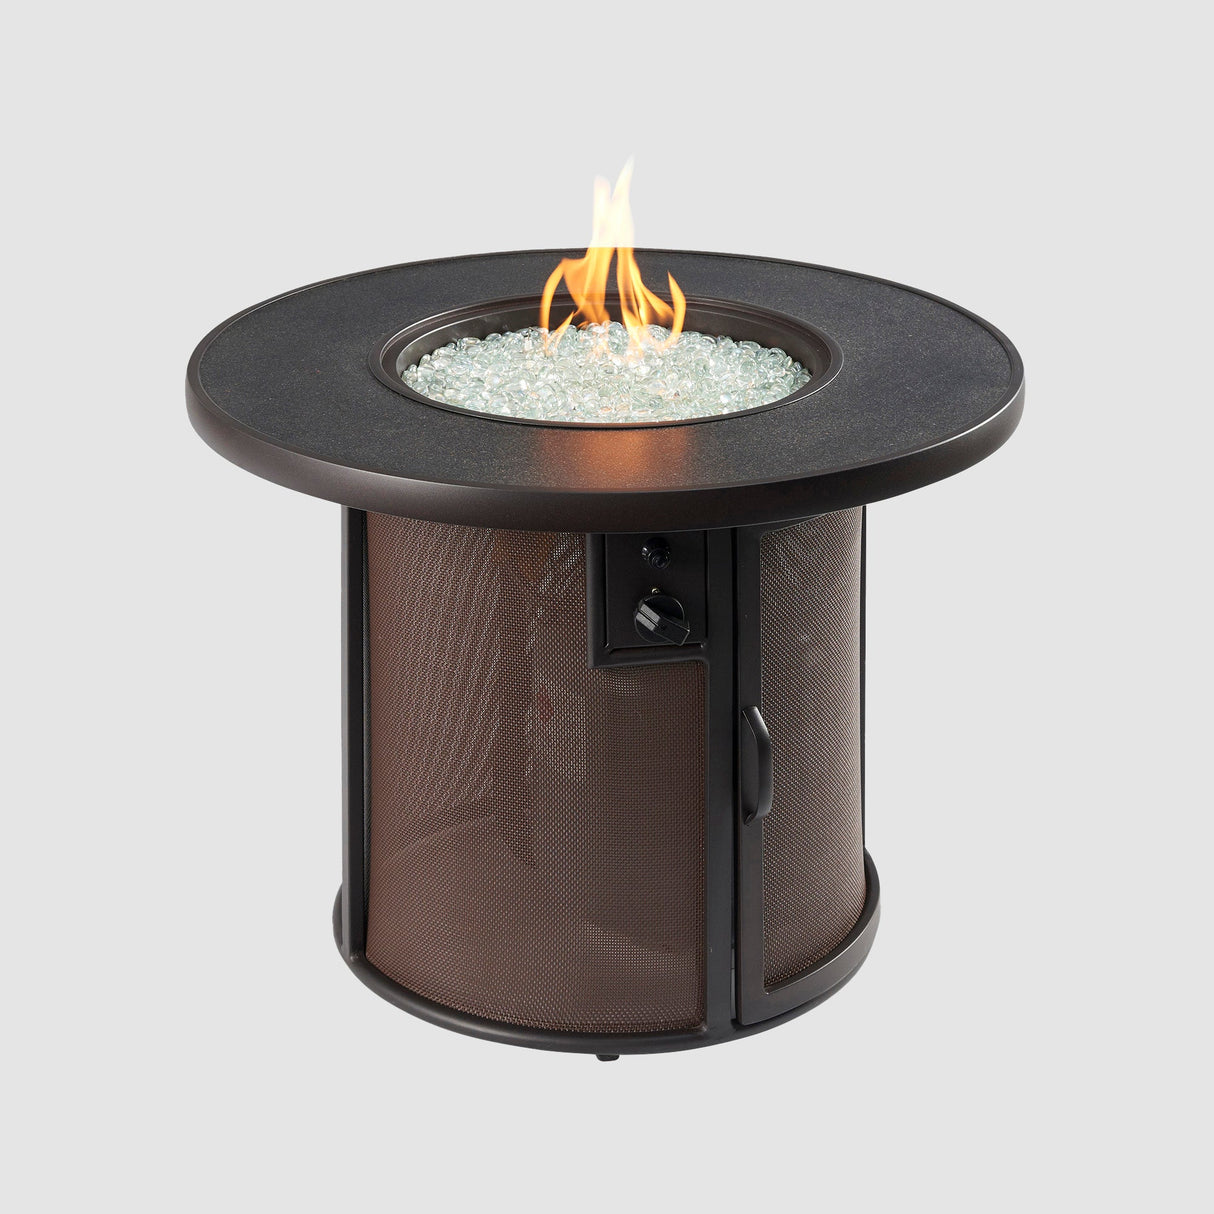 Brown Stonefire Round Gas Fire Pit Table on a grey background